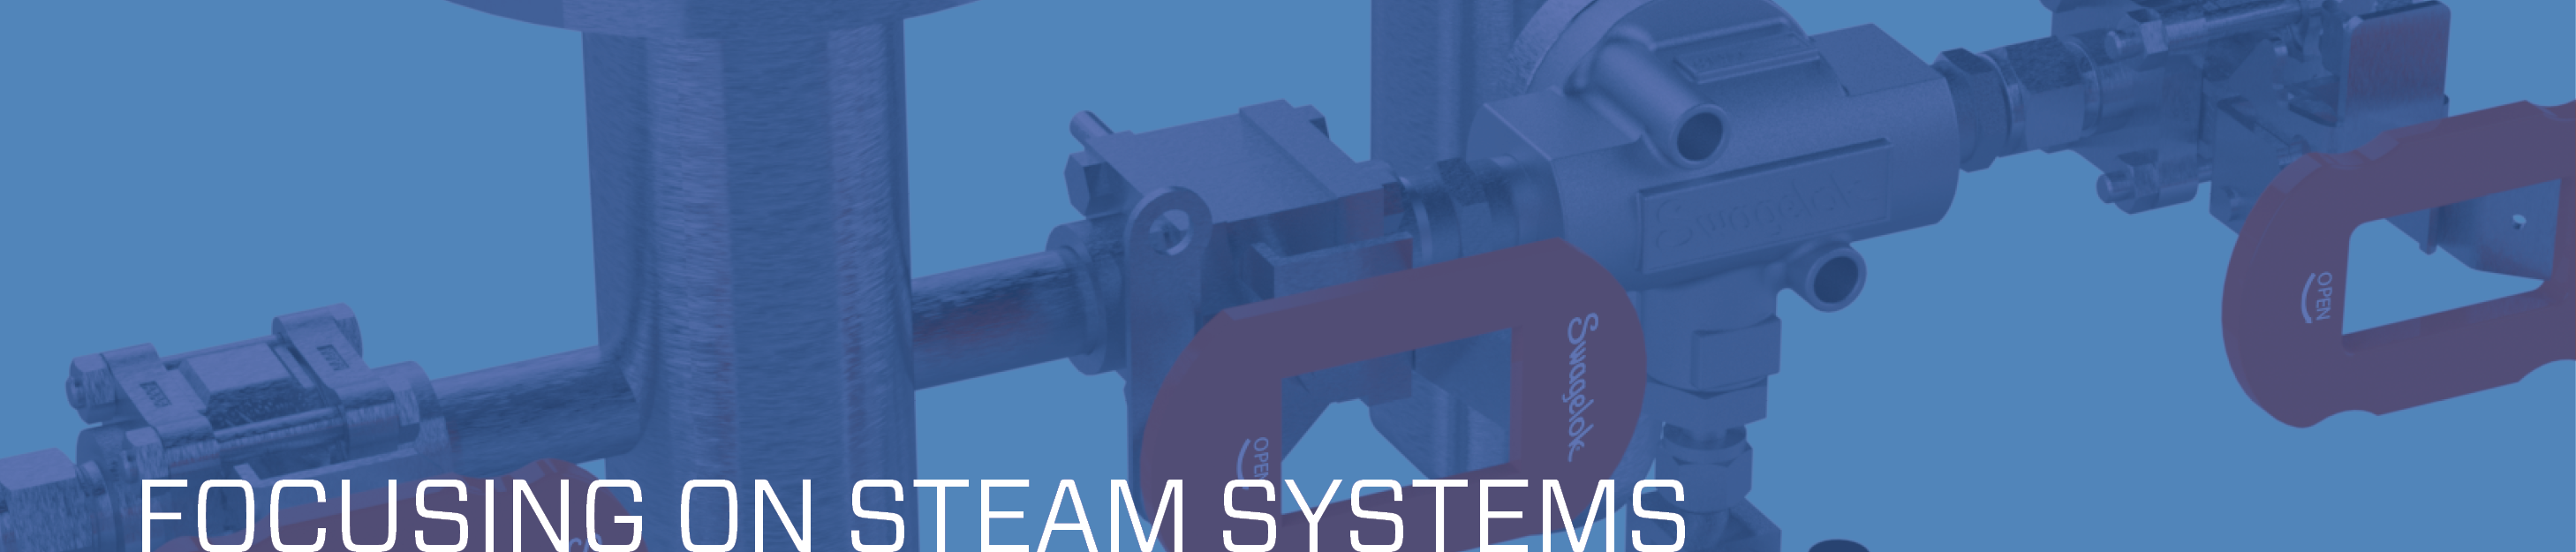 Focusing on Steam Systems